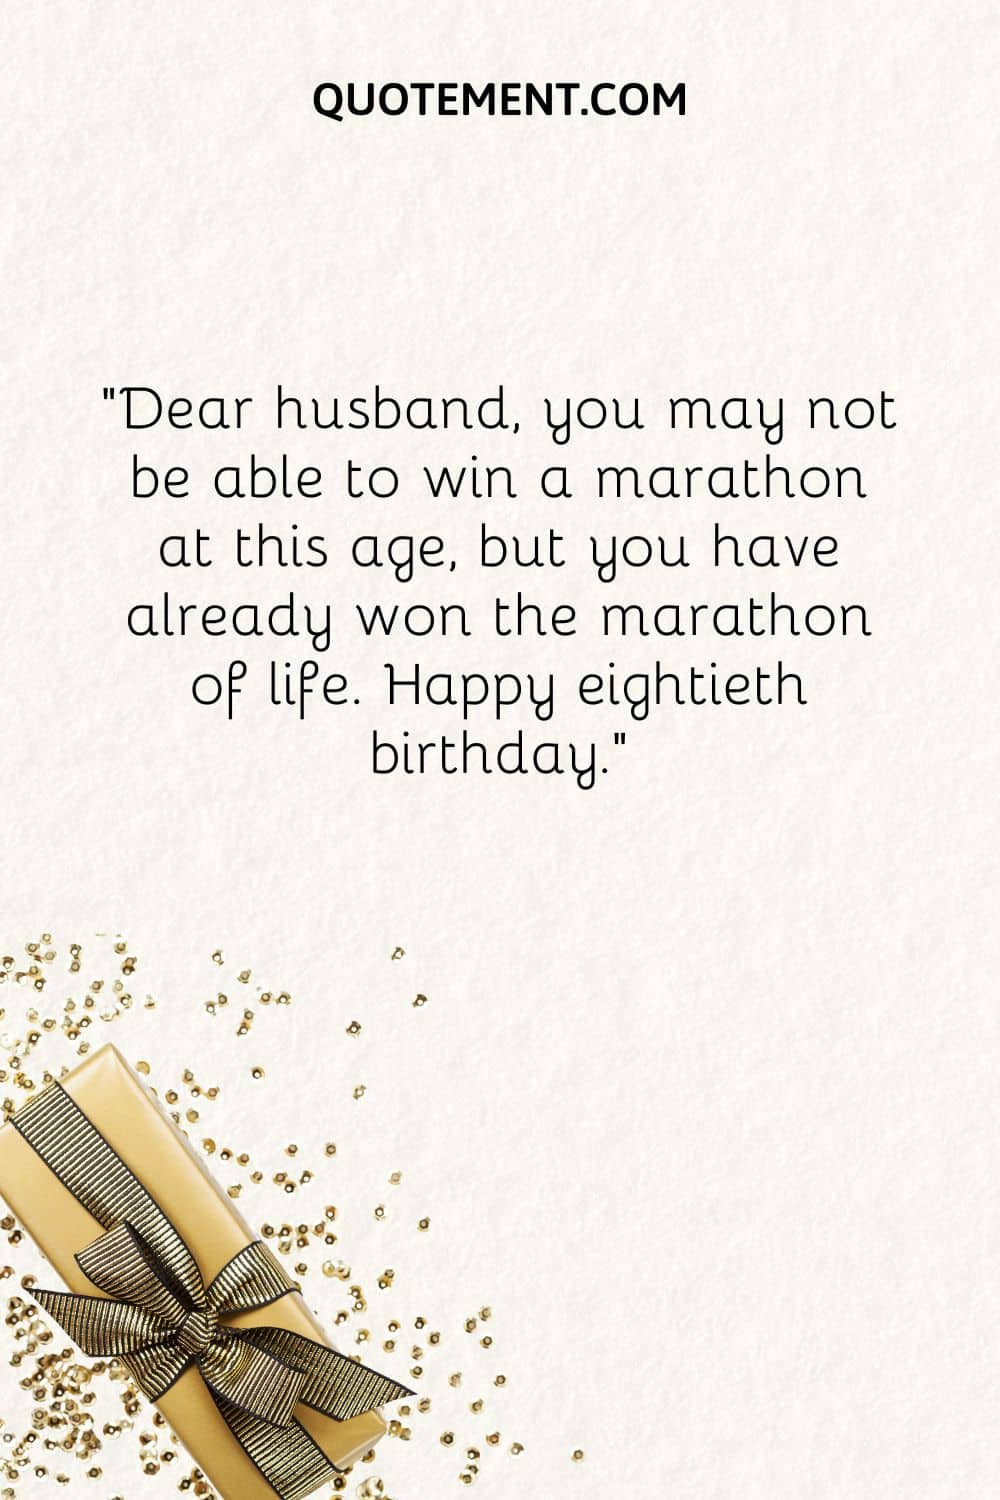 Dear husband, you may not be able to win a marathon at this age, but you have already won the marathon of life